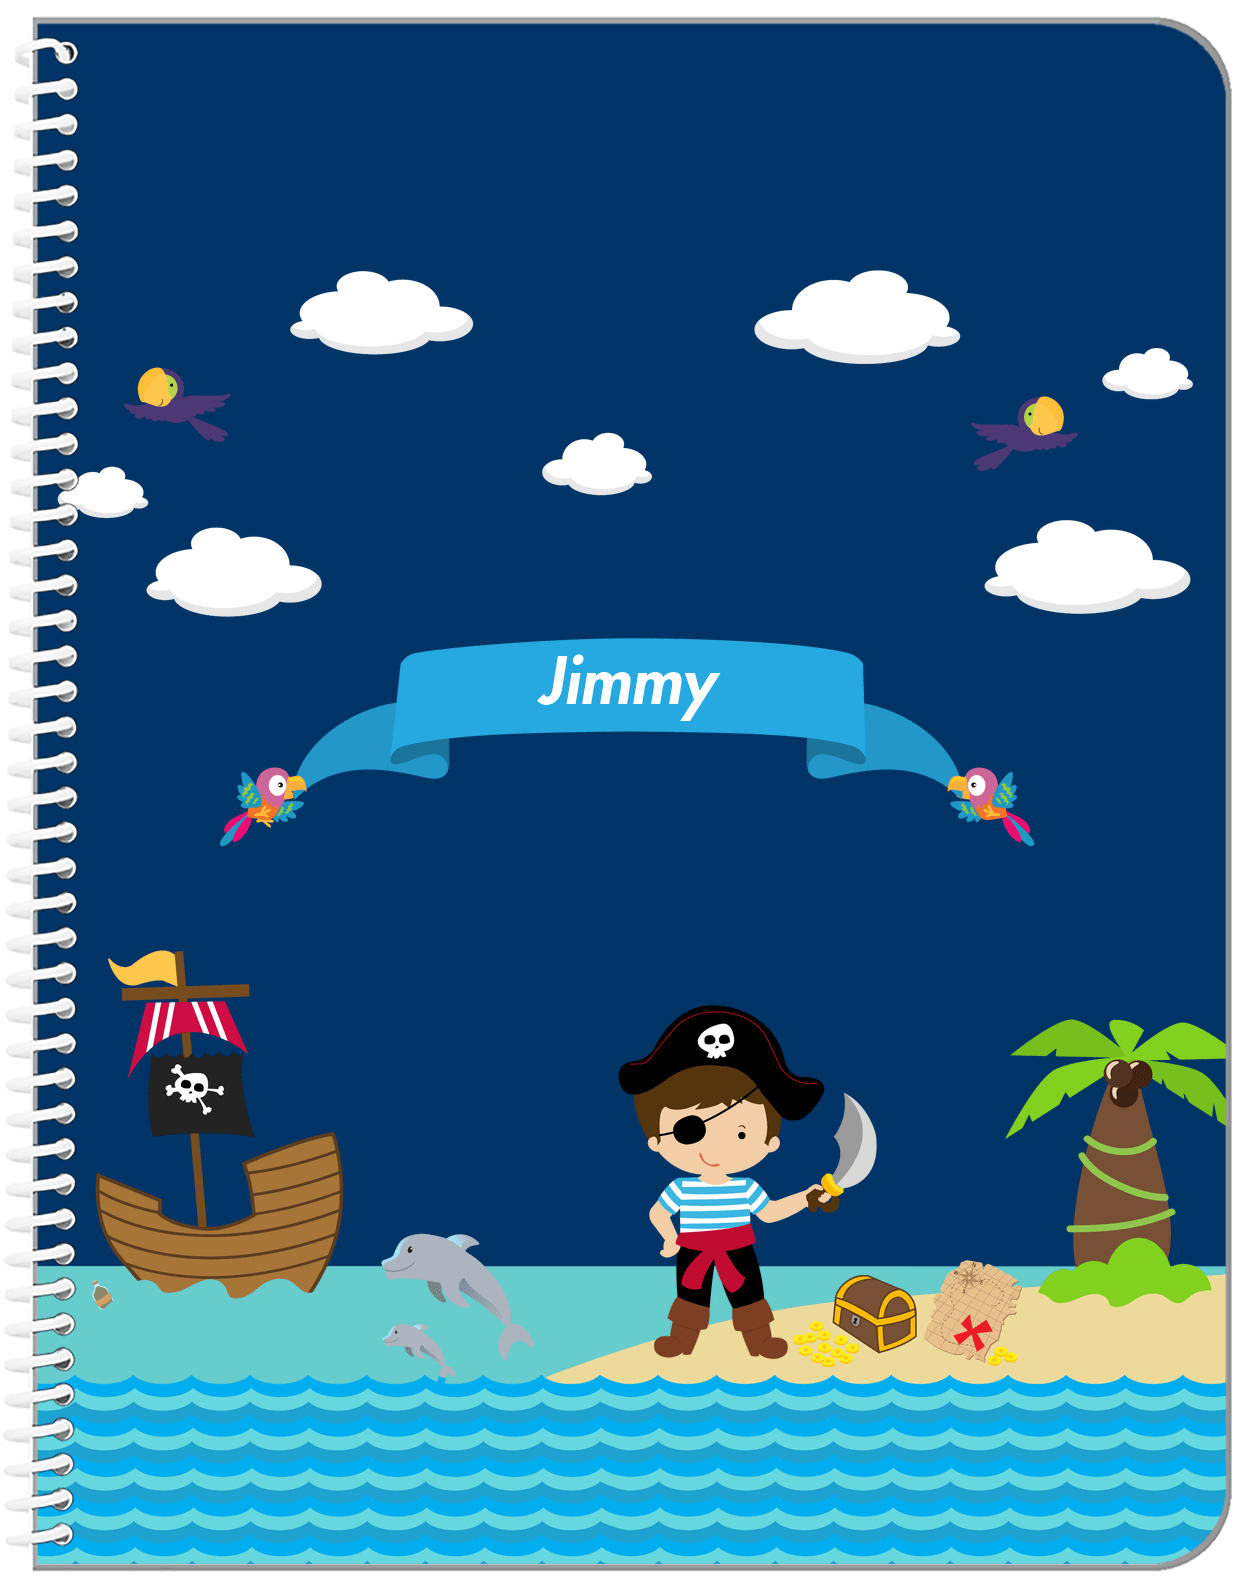 Personalized Pirate Notebook IV - Boy Pirate with Sword - Brown Hair Boy - Front View